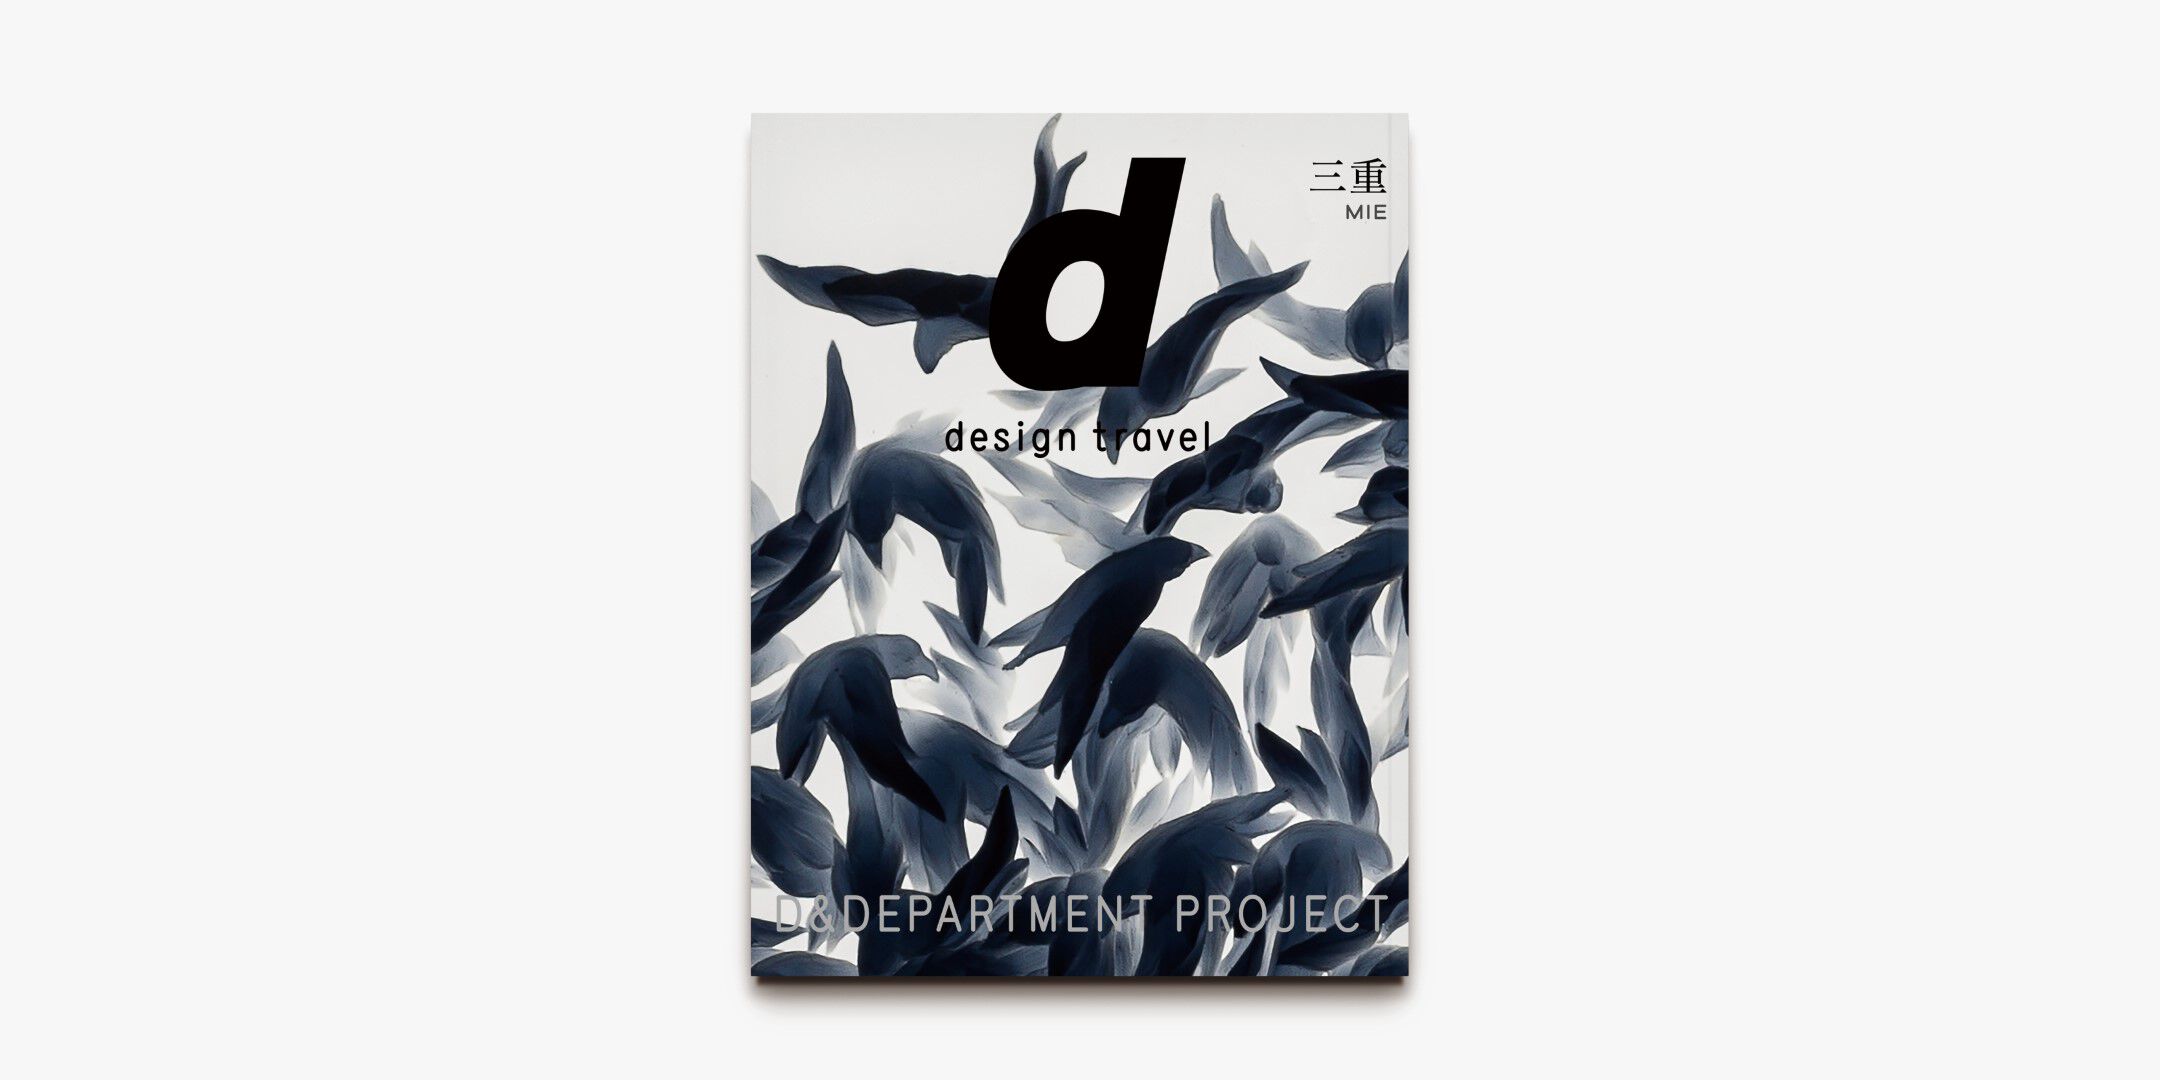 Books | D&DEPARTMENT Official Global Store